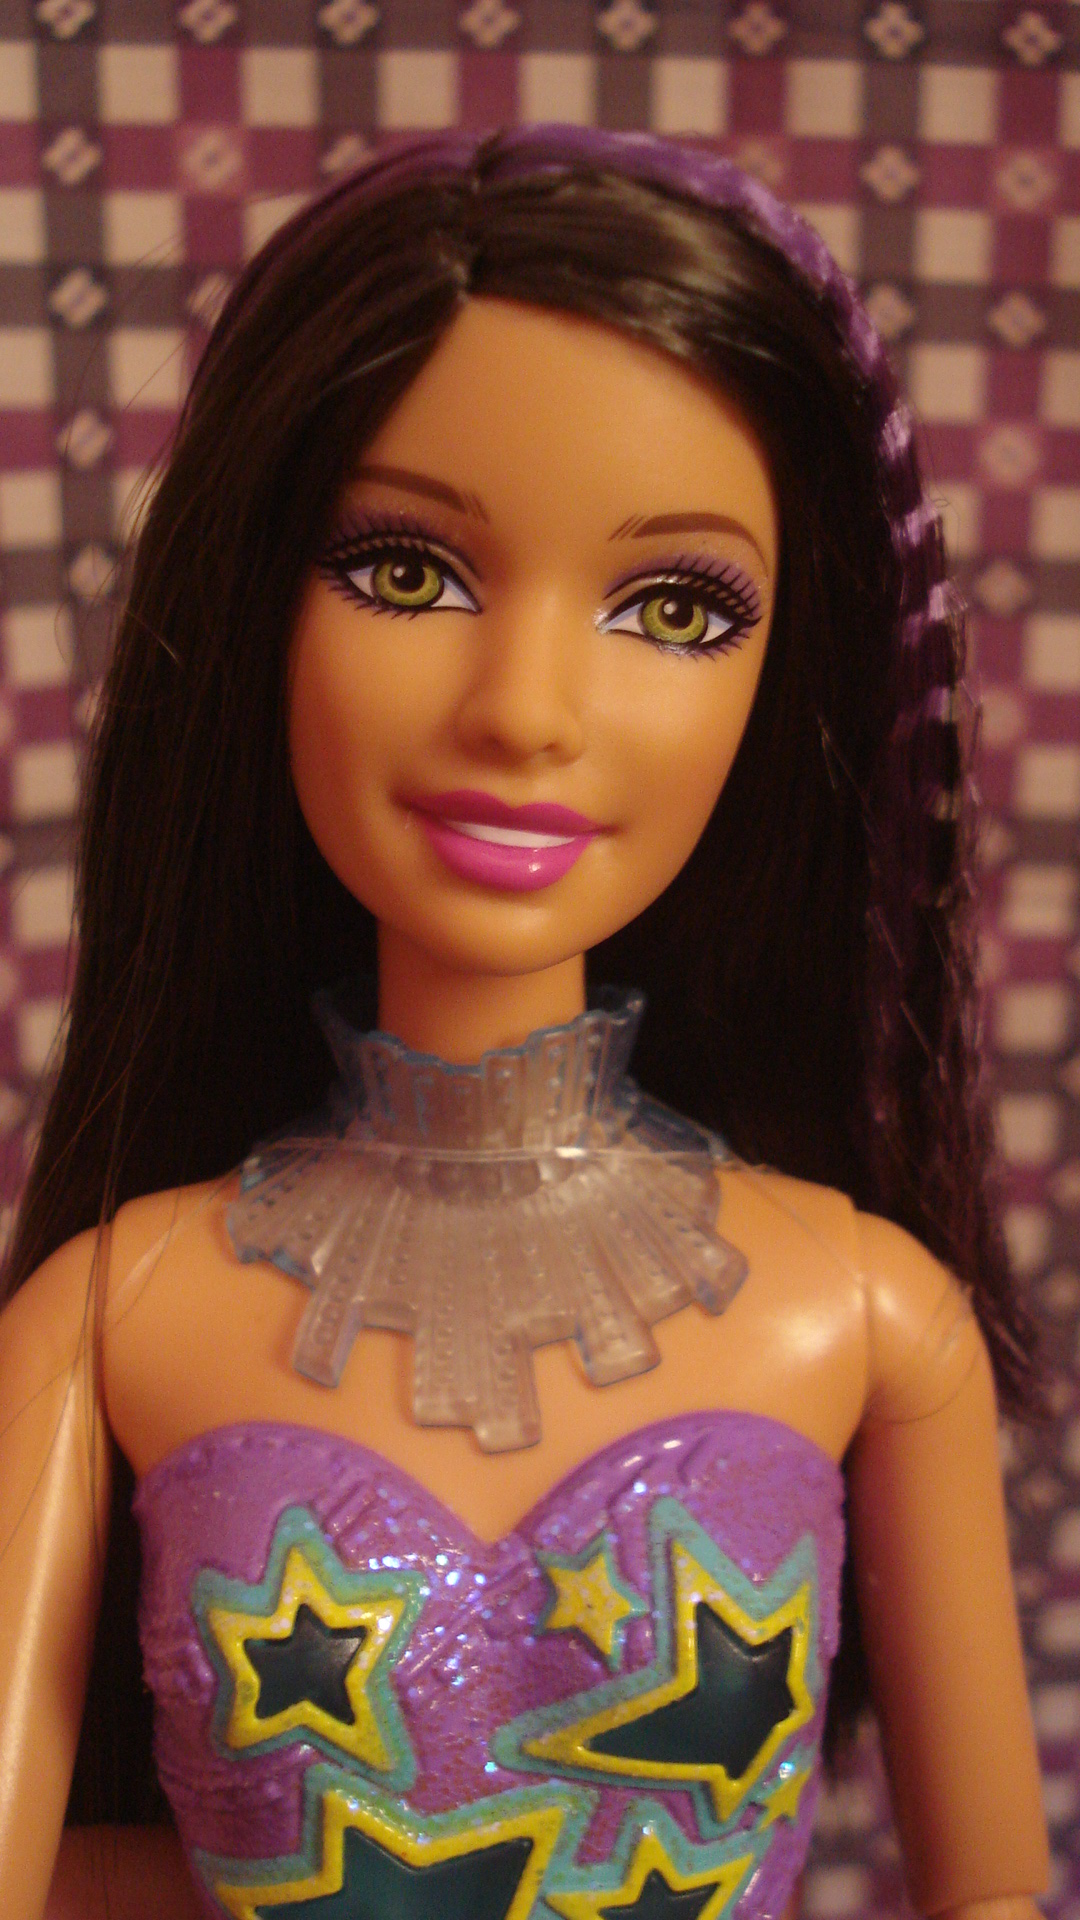 the barbie doll has bright colors with stars